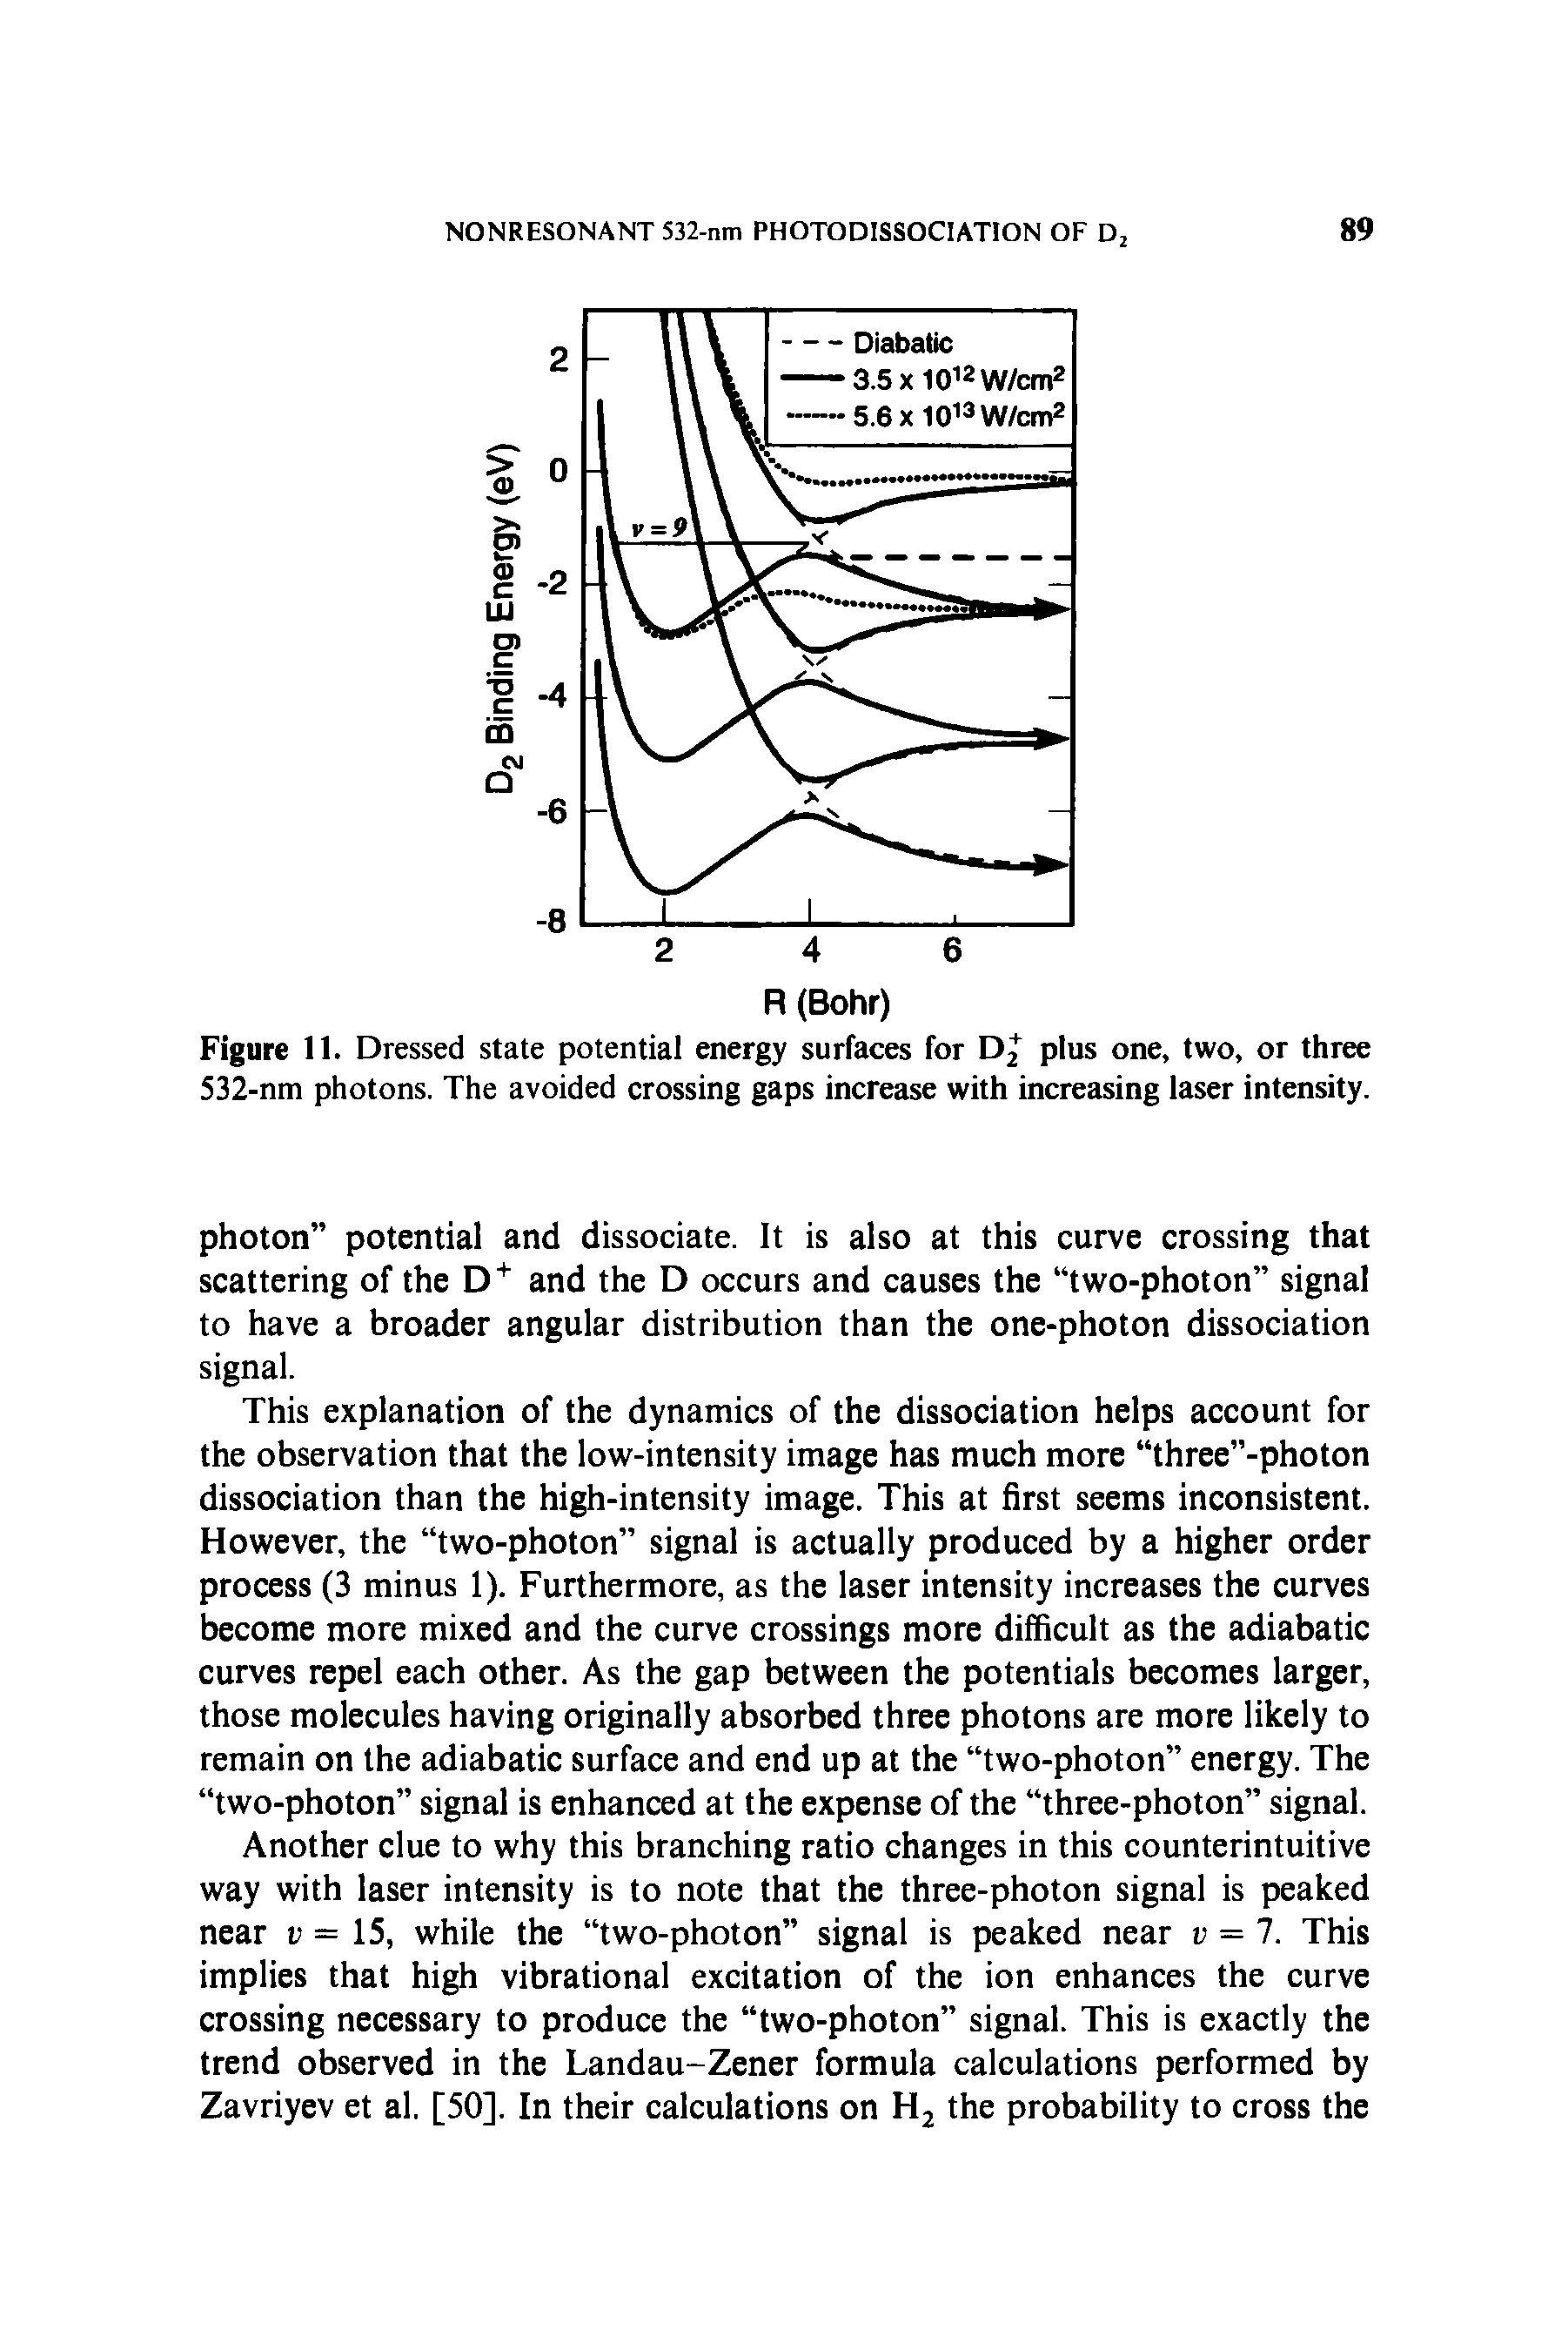 Figure 11. Dressed state potential energy surfaces for D2 plus one, two, or three 532-nm photons. The avoided crossing gaps increase with increasing laser intensity.